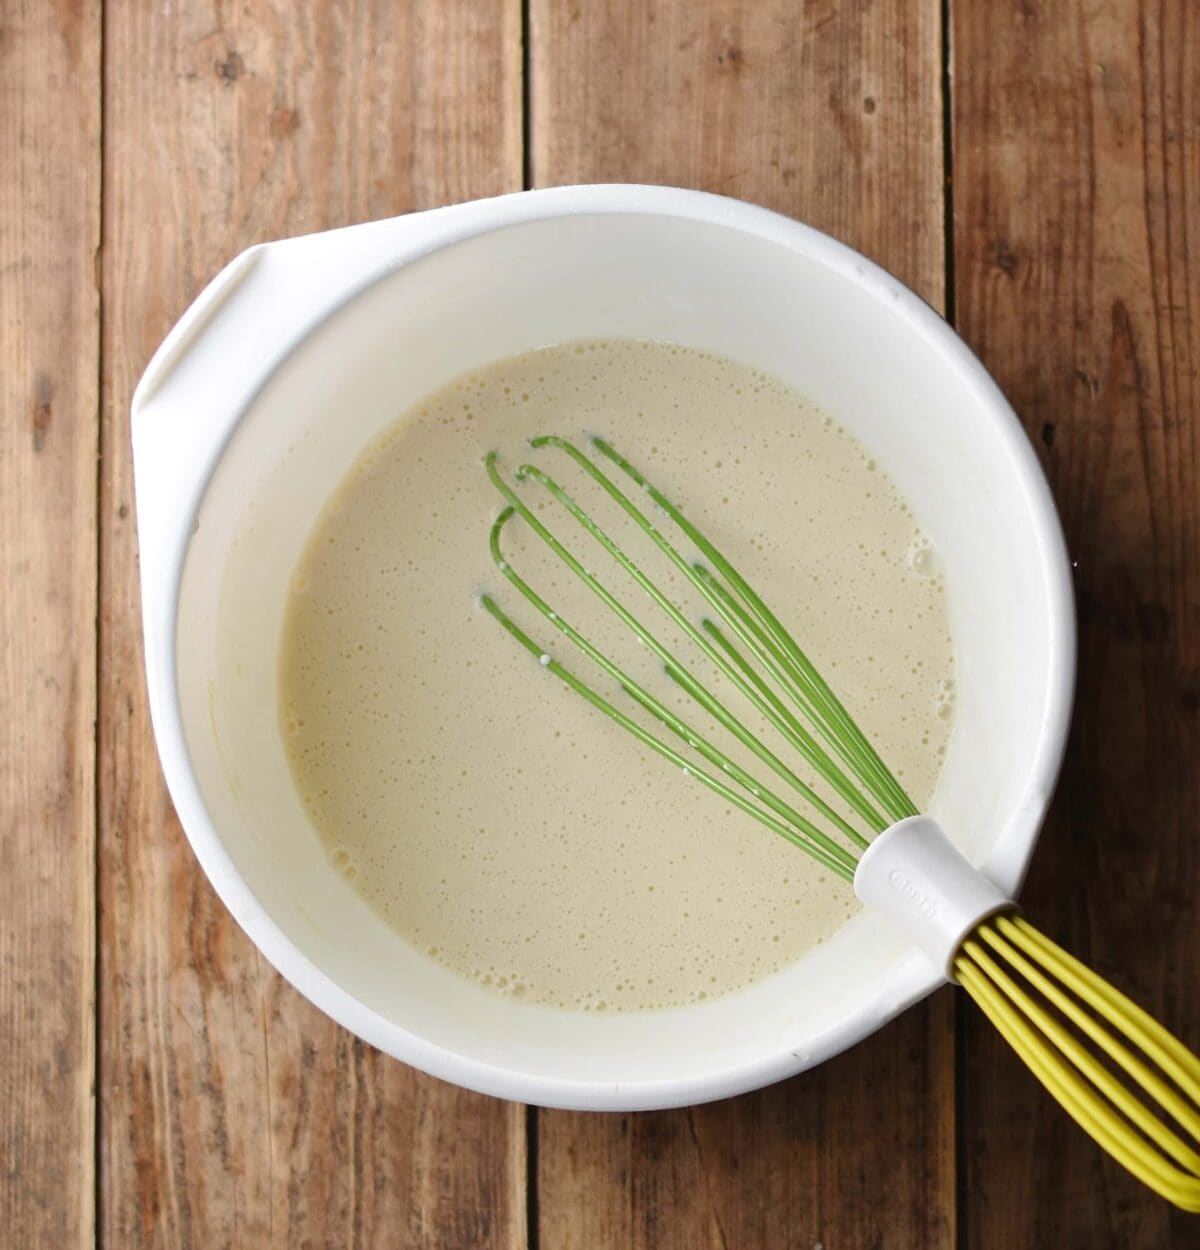 Crepes batter in large white bowl with green whisk.